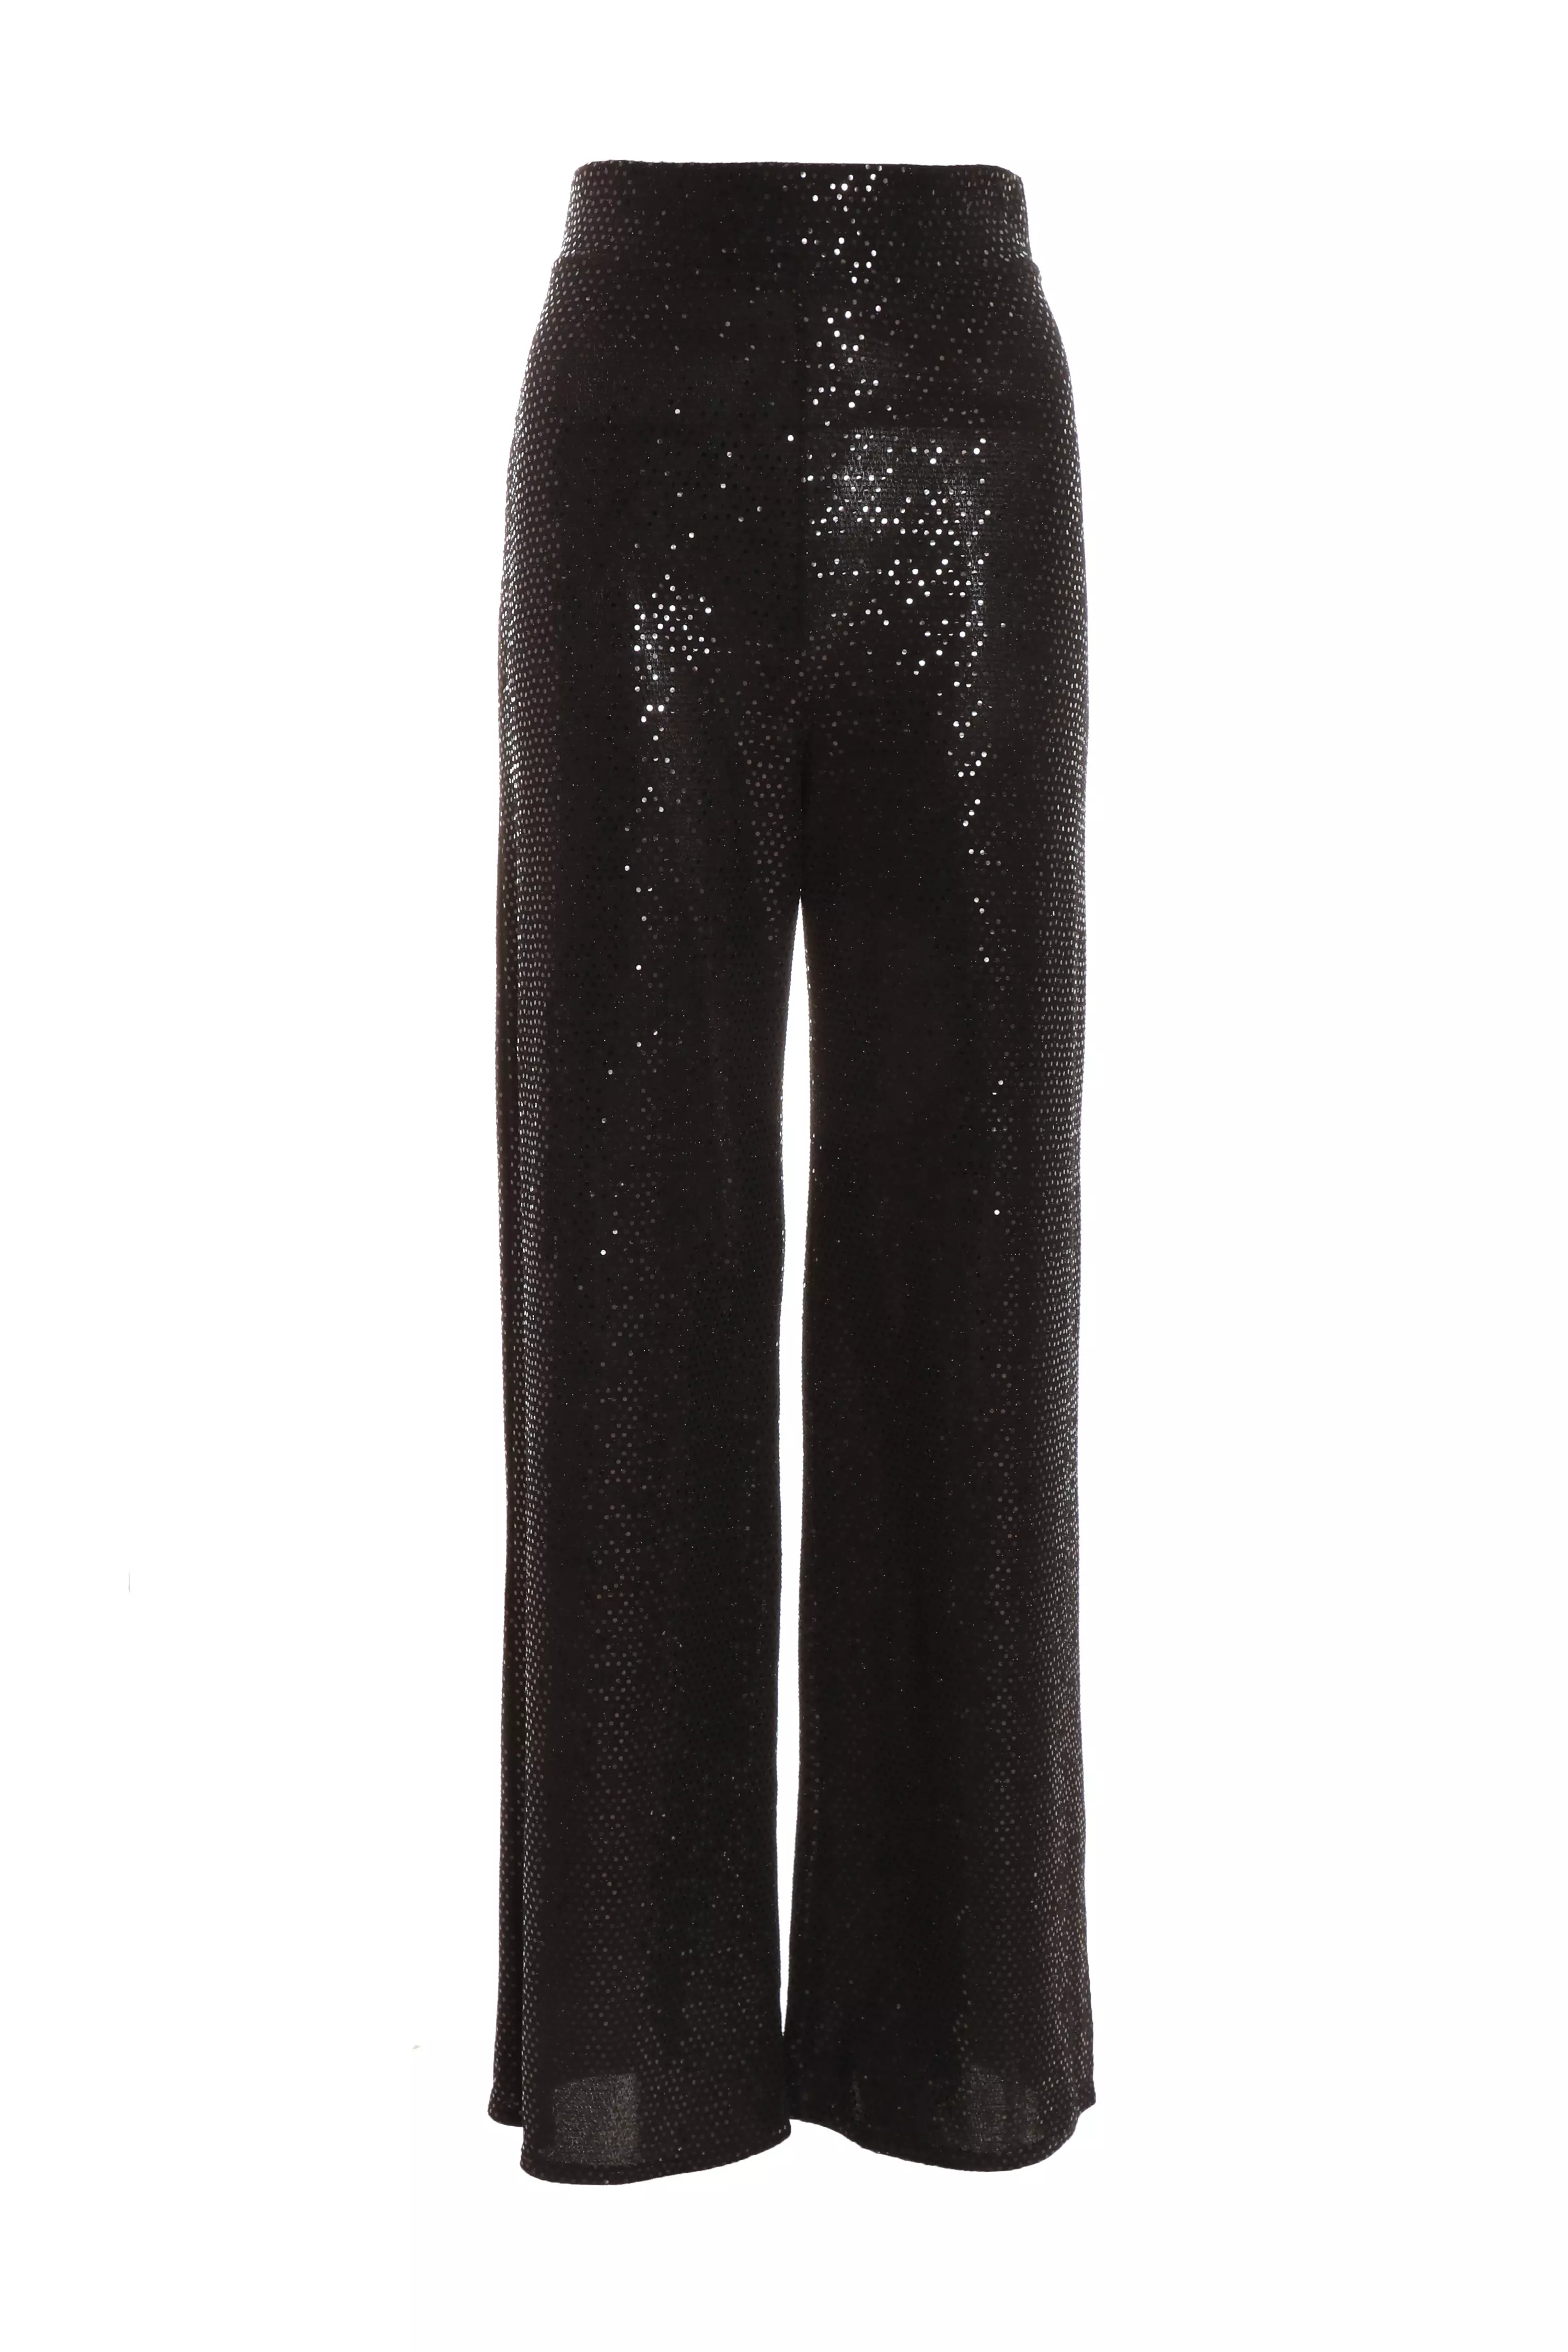 Black Sequin High Waist Palazzo Trousers - QUIZ Clothing